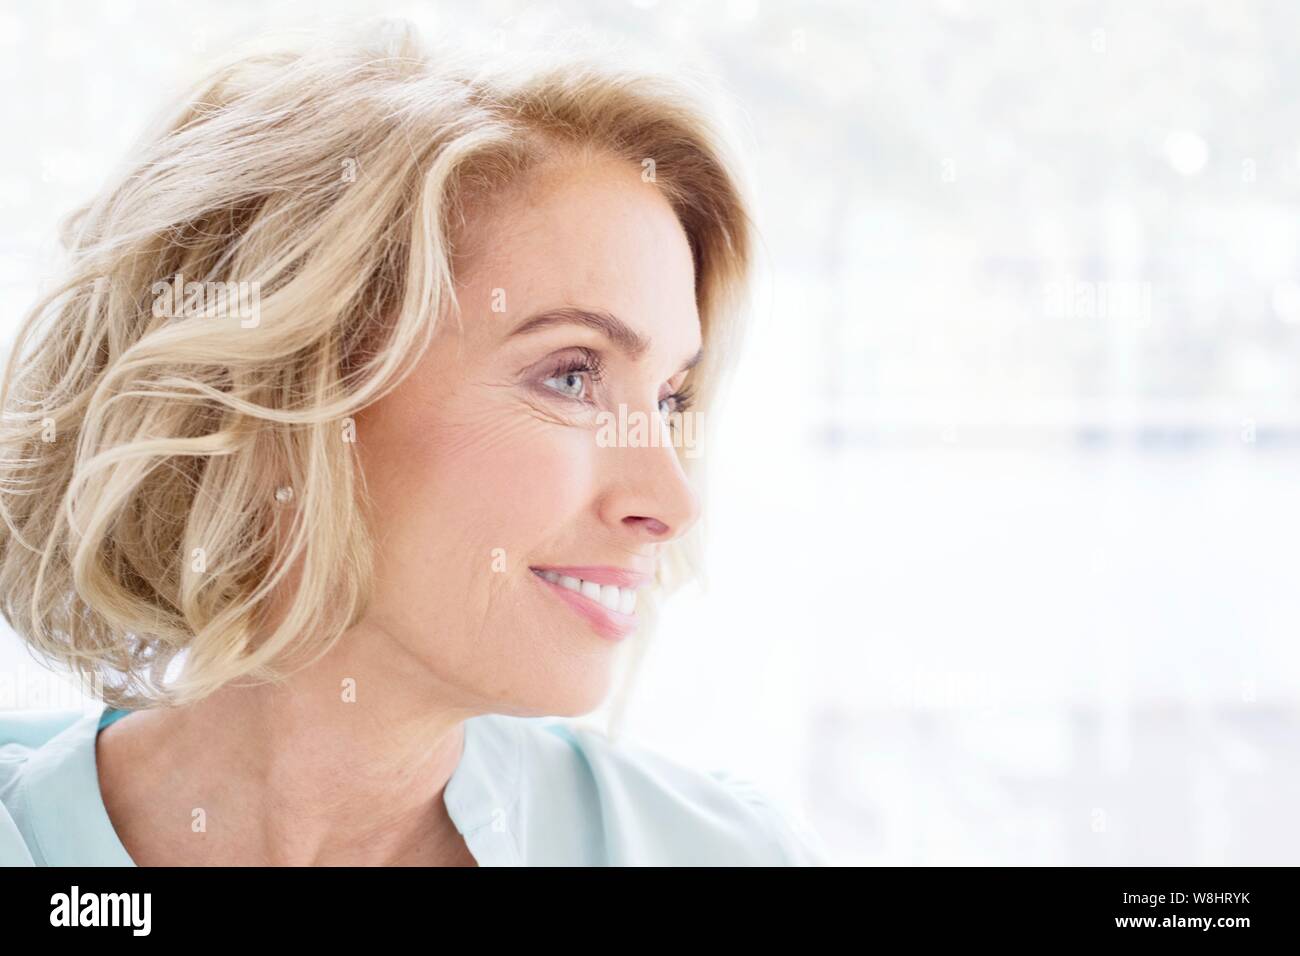 Mature woman smiling and looking away. Stock Photo